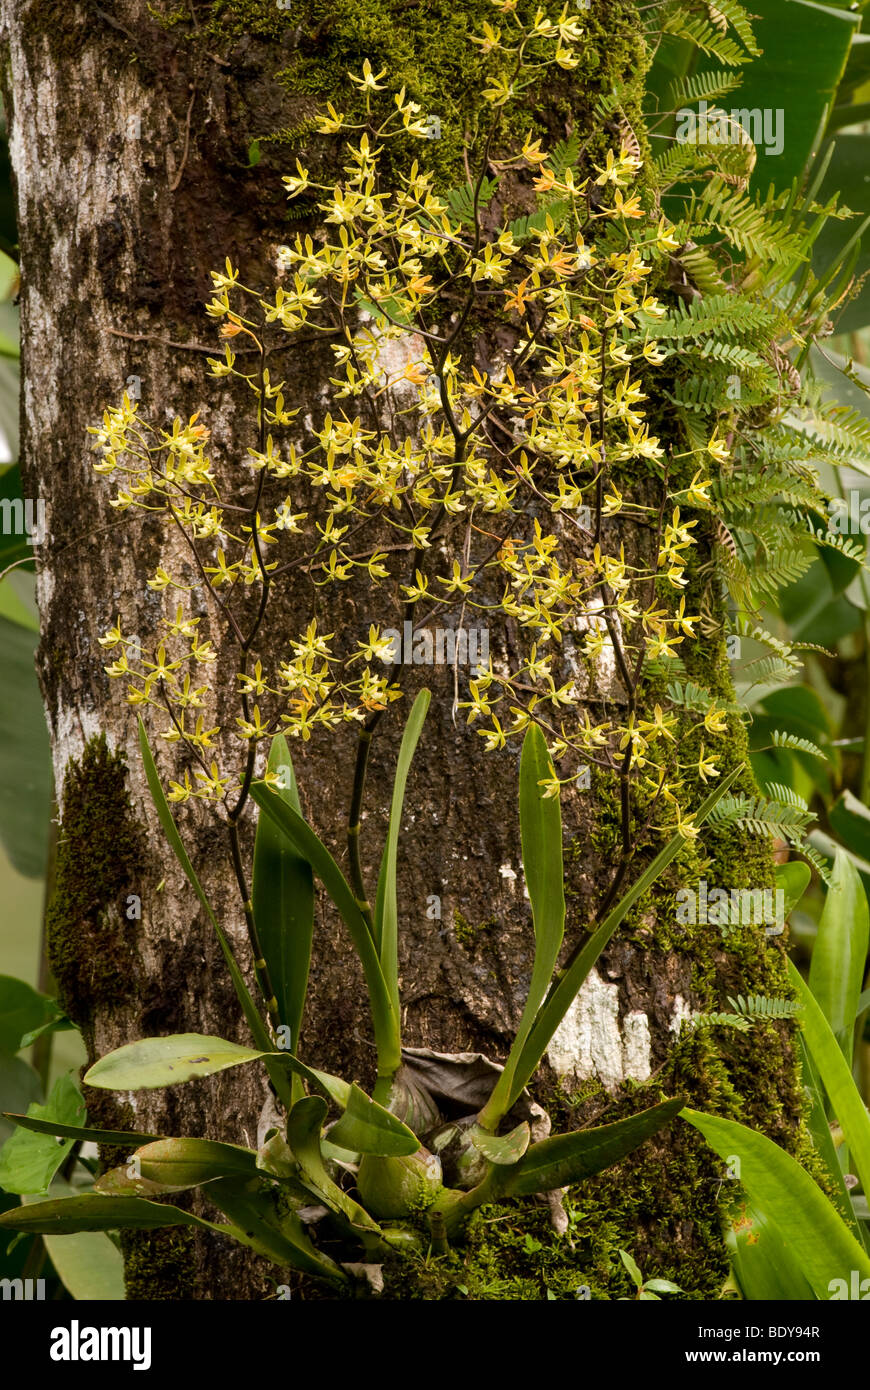 Epiphytic orchid on a tree trunk, La Fortuna, Costa Rica. Stock Photo